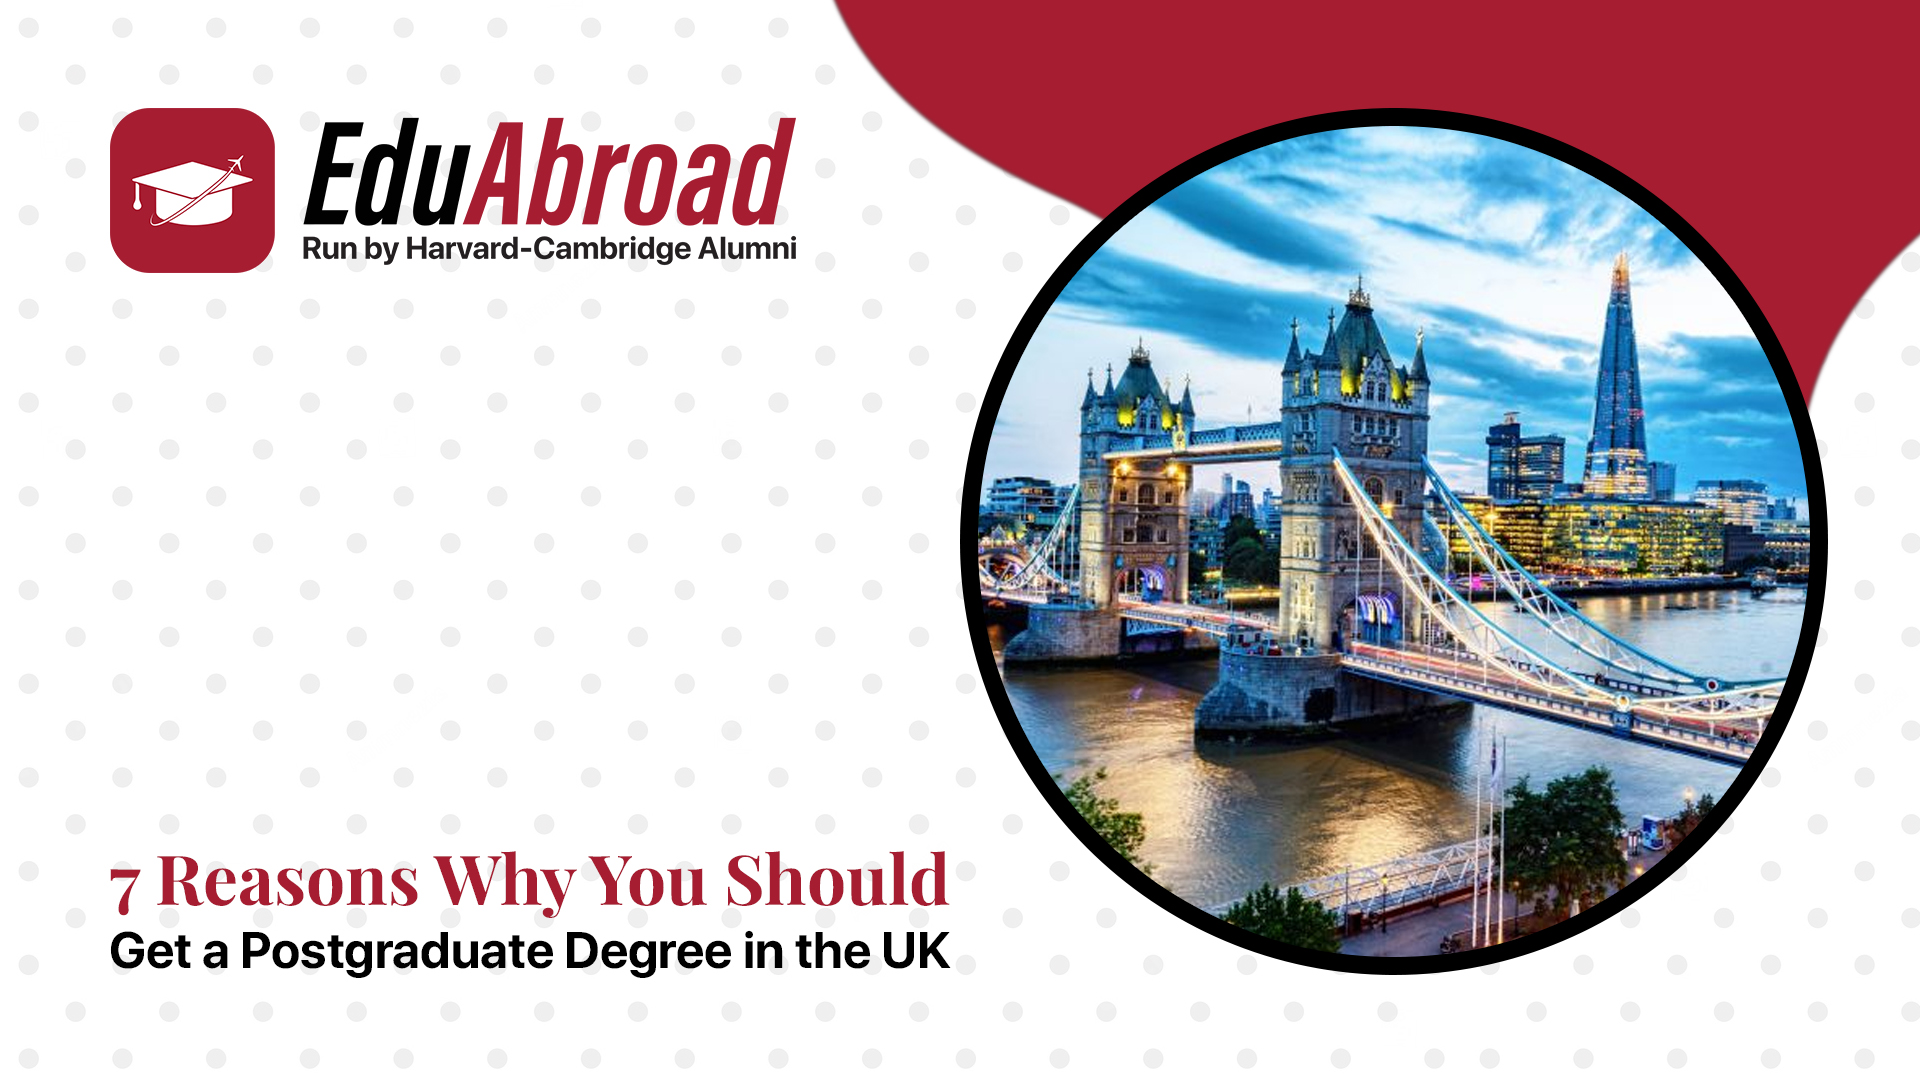 7 Reasons Why You Should Get a Postgraduate Degree in the UK